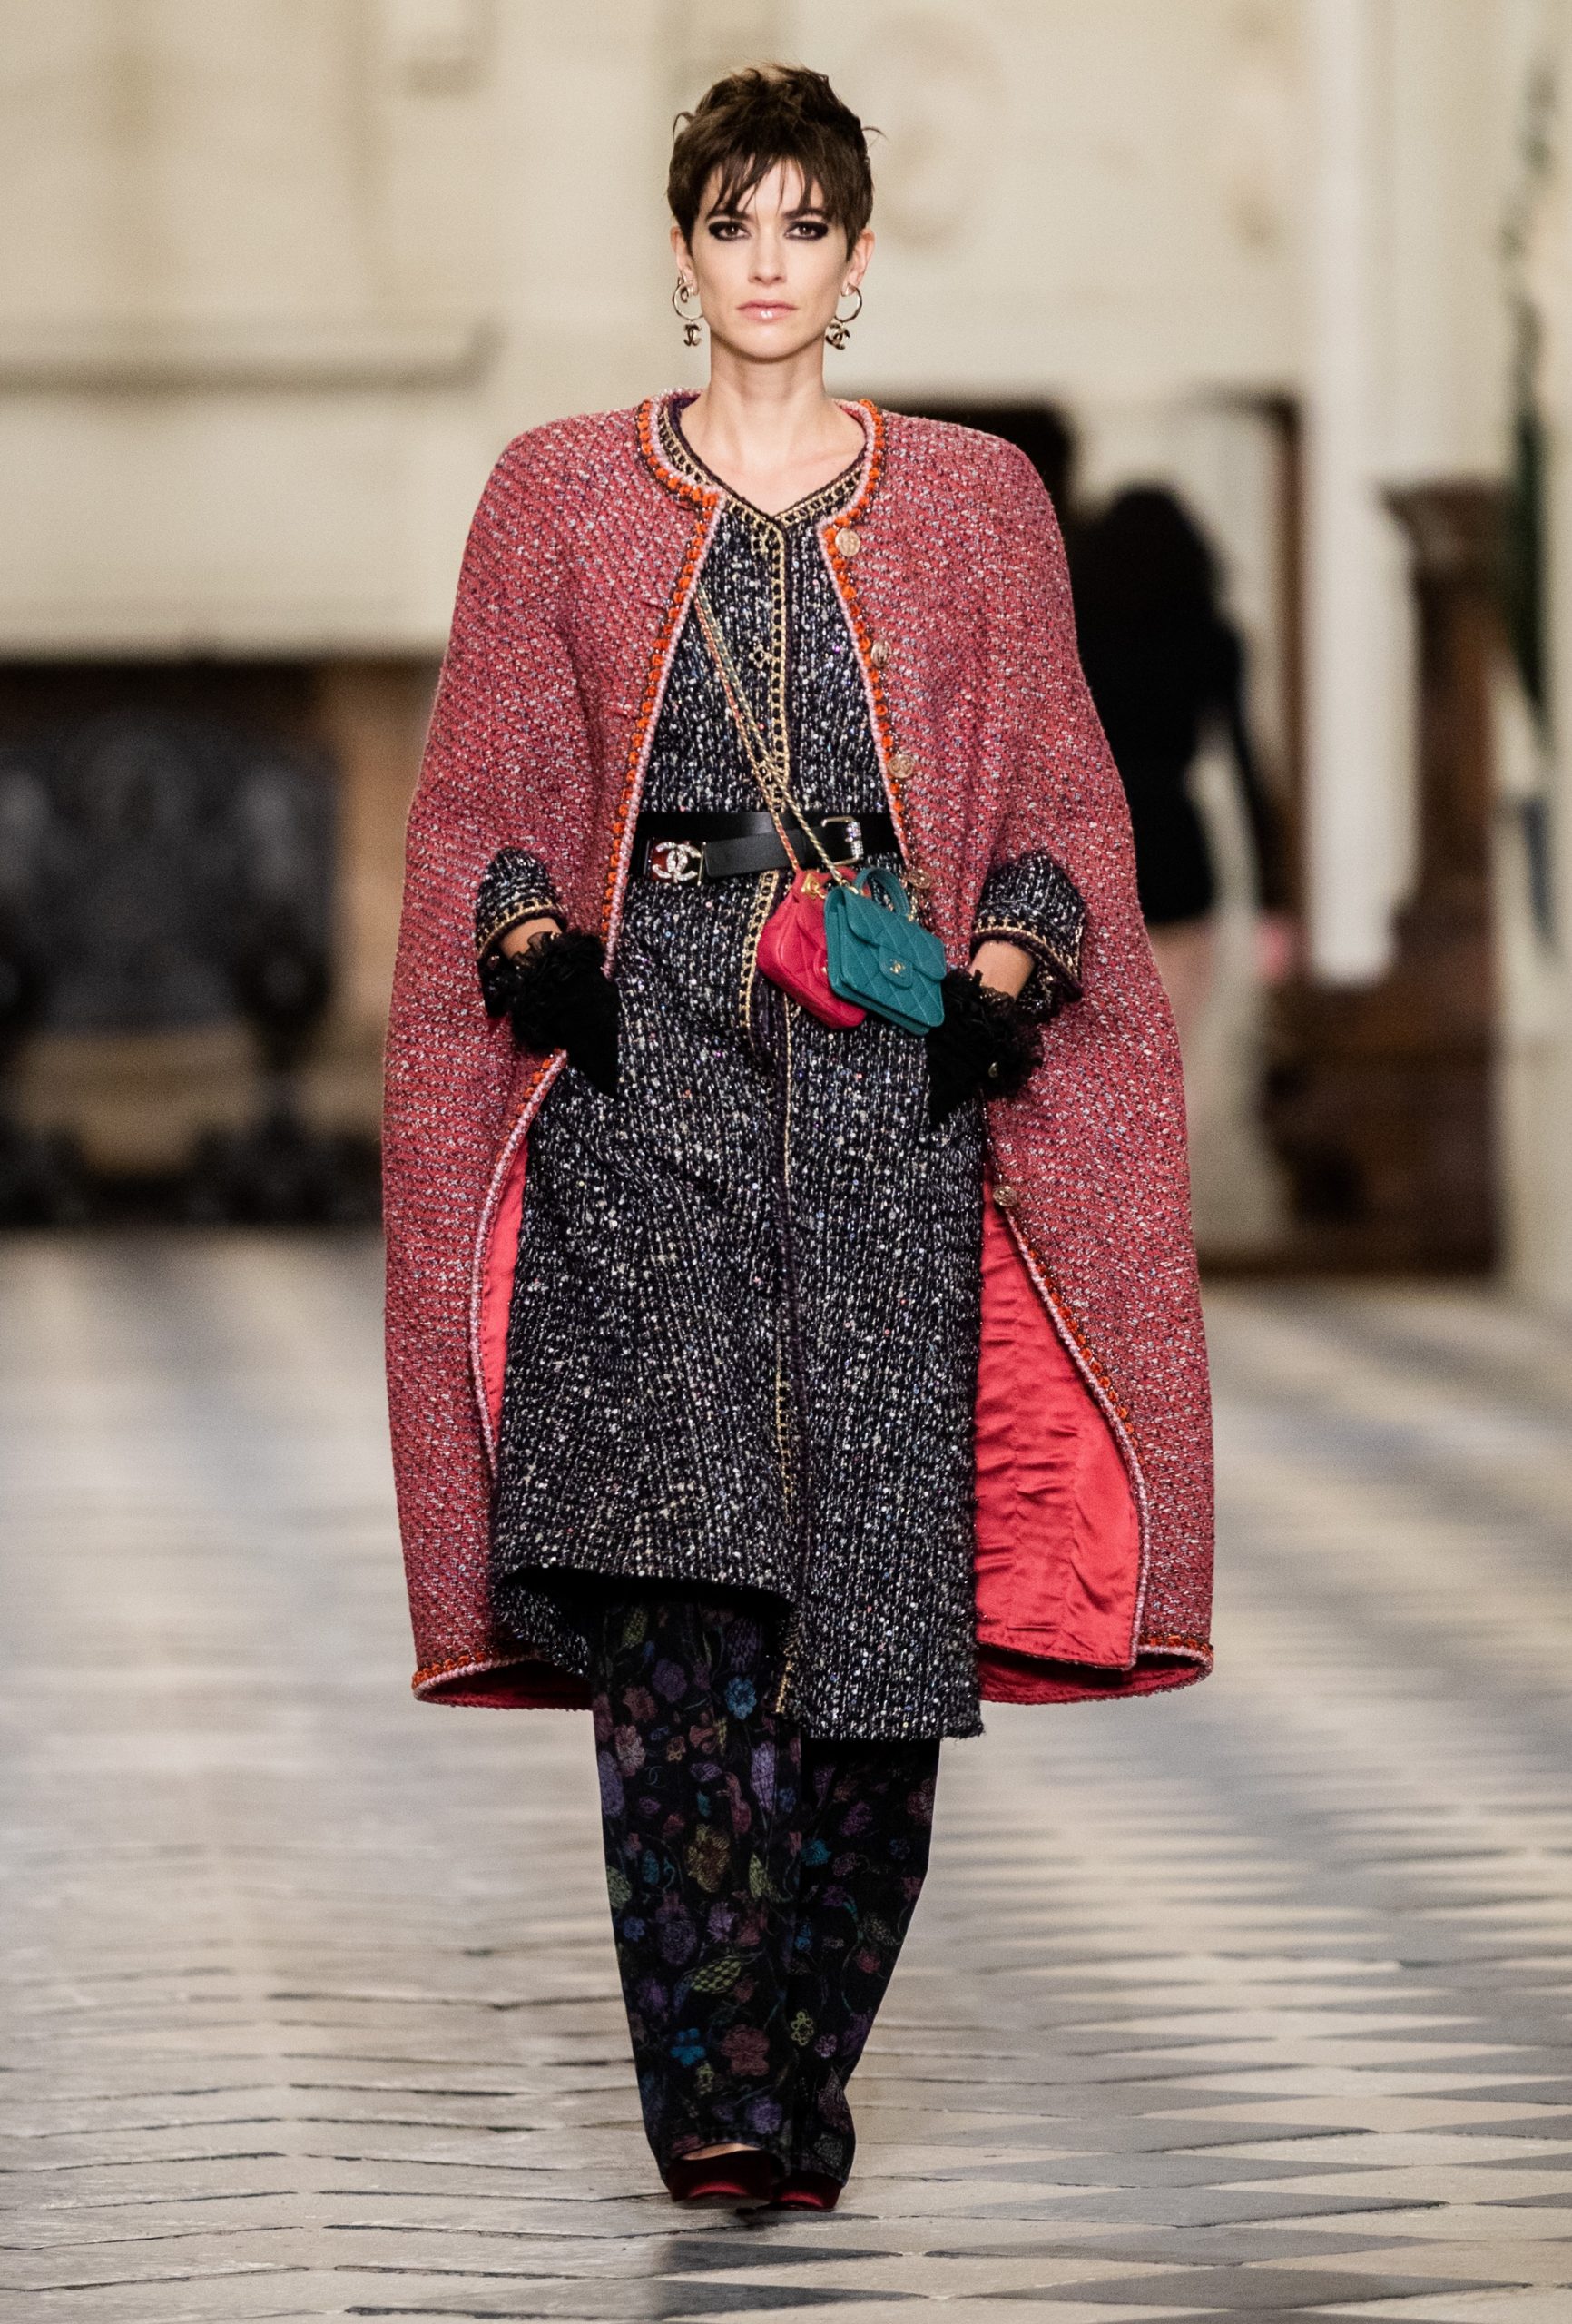 Chanel's Latest Collection Celebrated Renaissance Women in a French ...